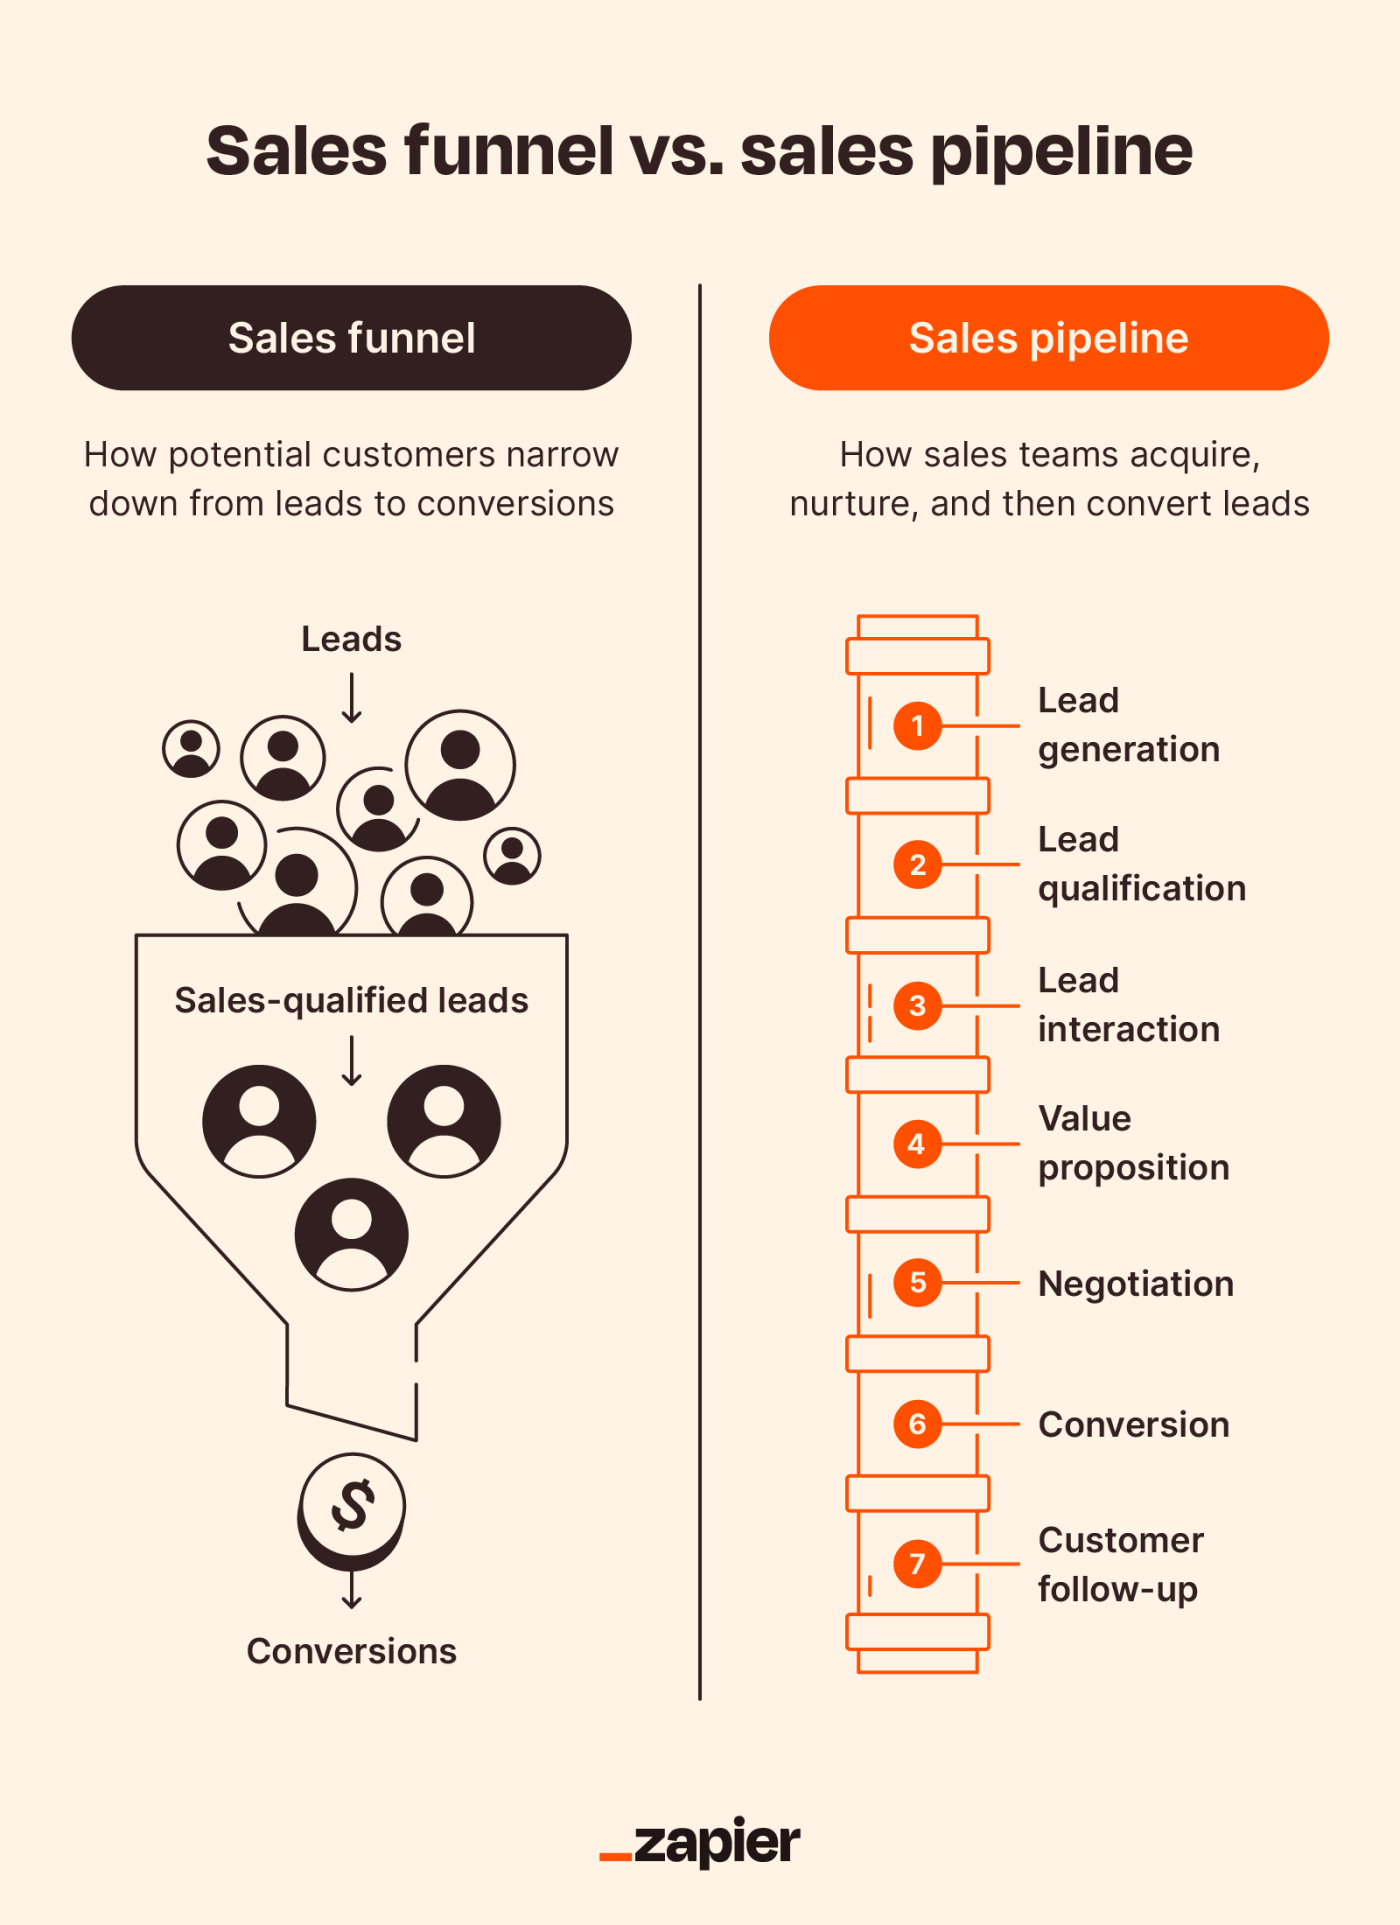 Illustrations showing the differences between sales funnel and sales pipeline